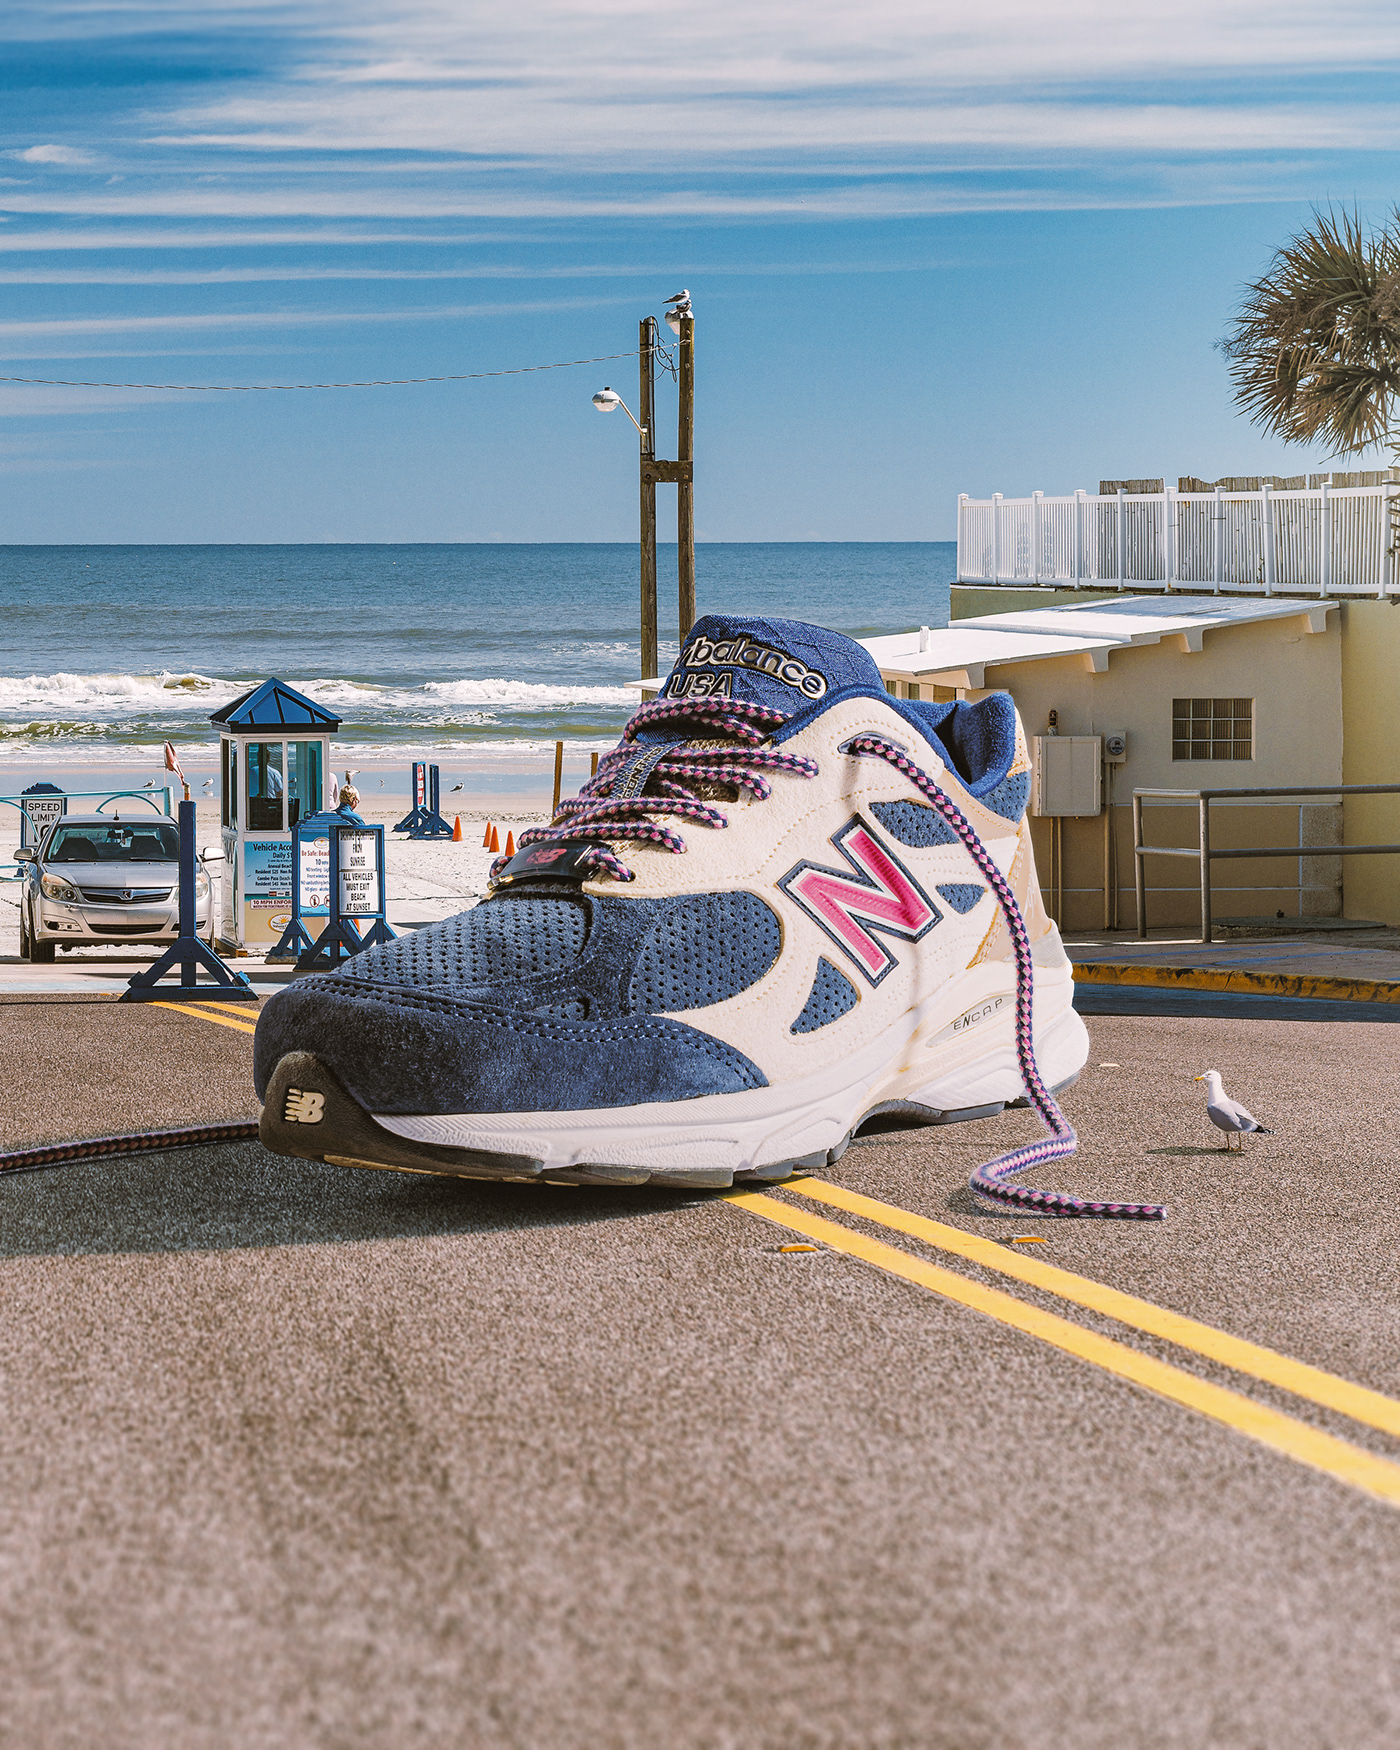 Giant sneaker photo composite at the beach . Retouching using Photoshop